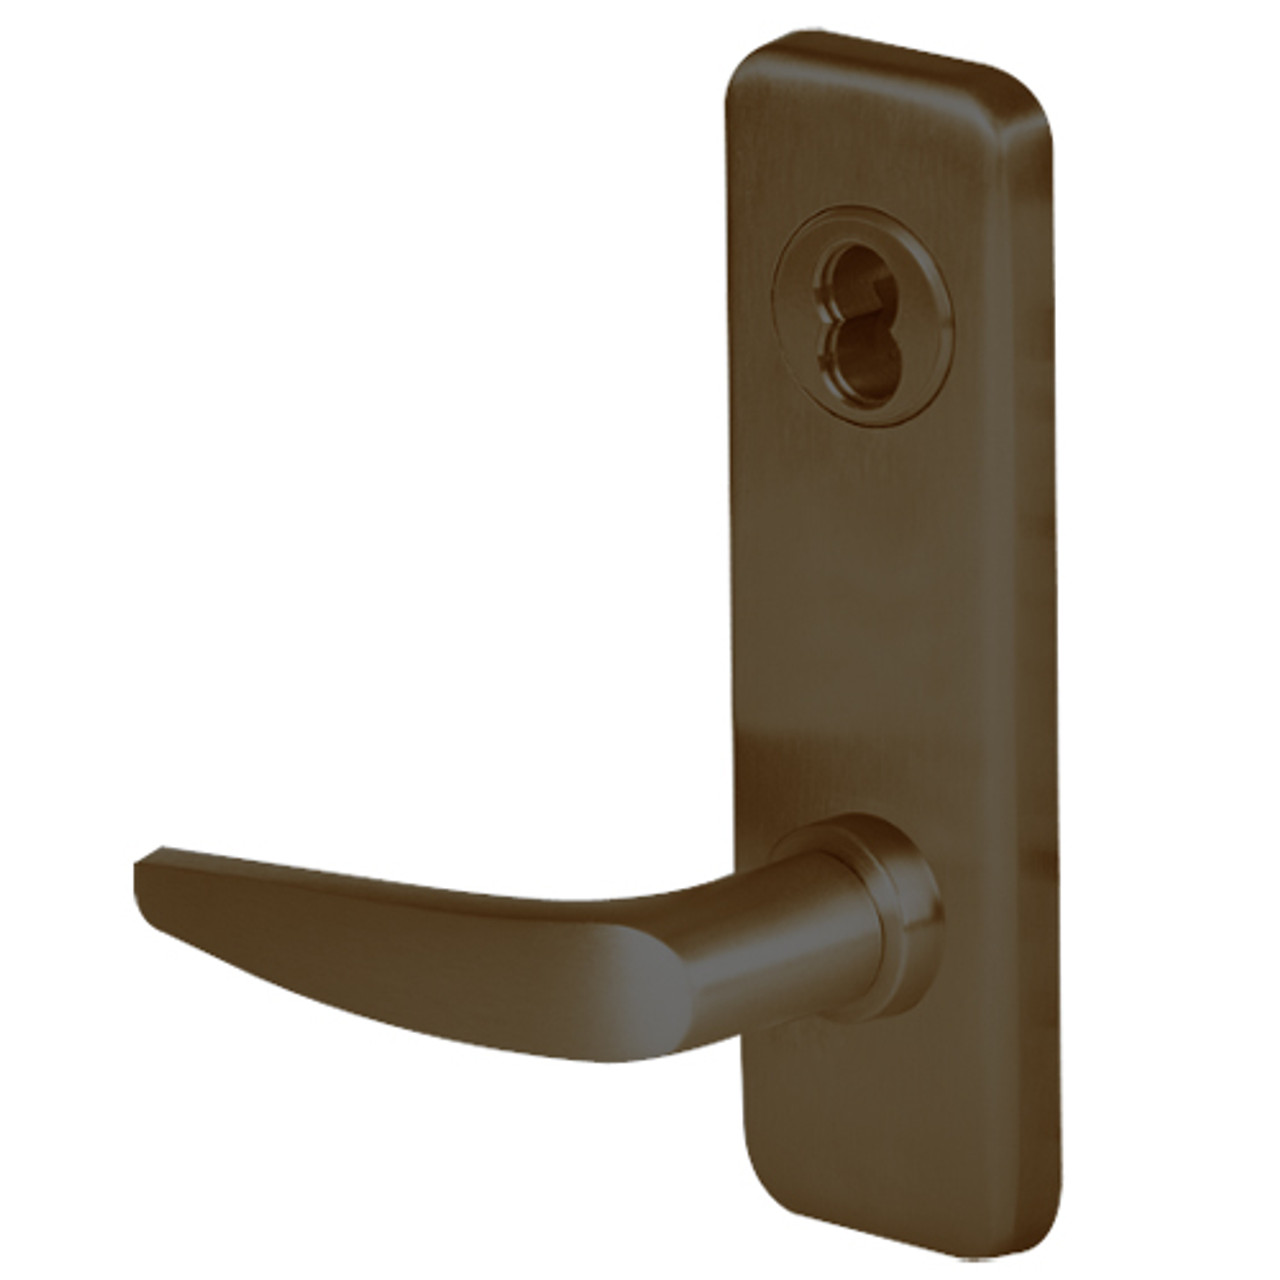 45H7G16J613 Best 40H Series Communicating with Deadbolt Heavy Duty Mortise Lever Lock with Curved with No Return in Oil Rubbed Bronze